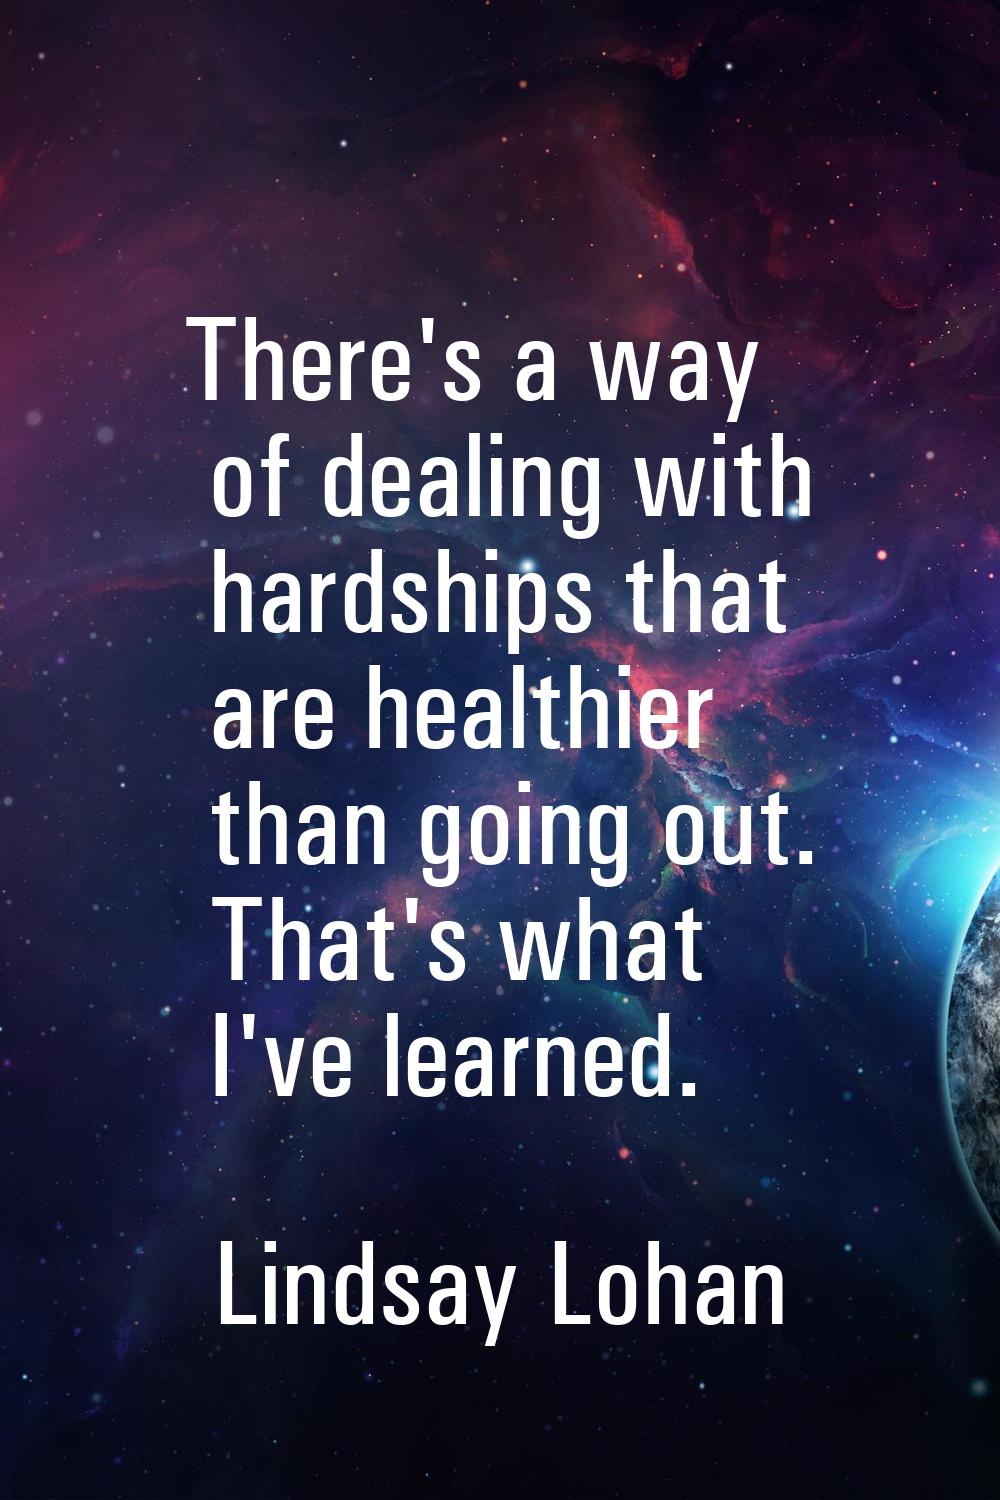 There's a way of dealing with hardships that are healthier than going out. That's what I've learned